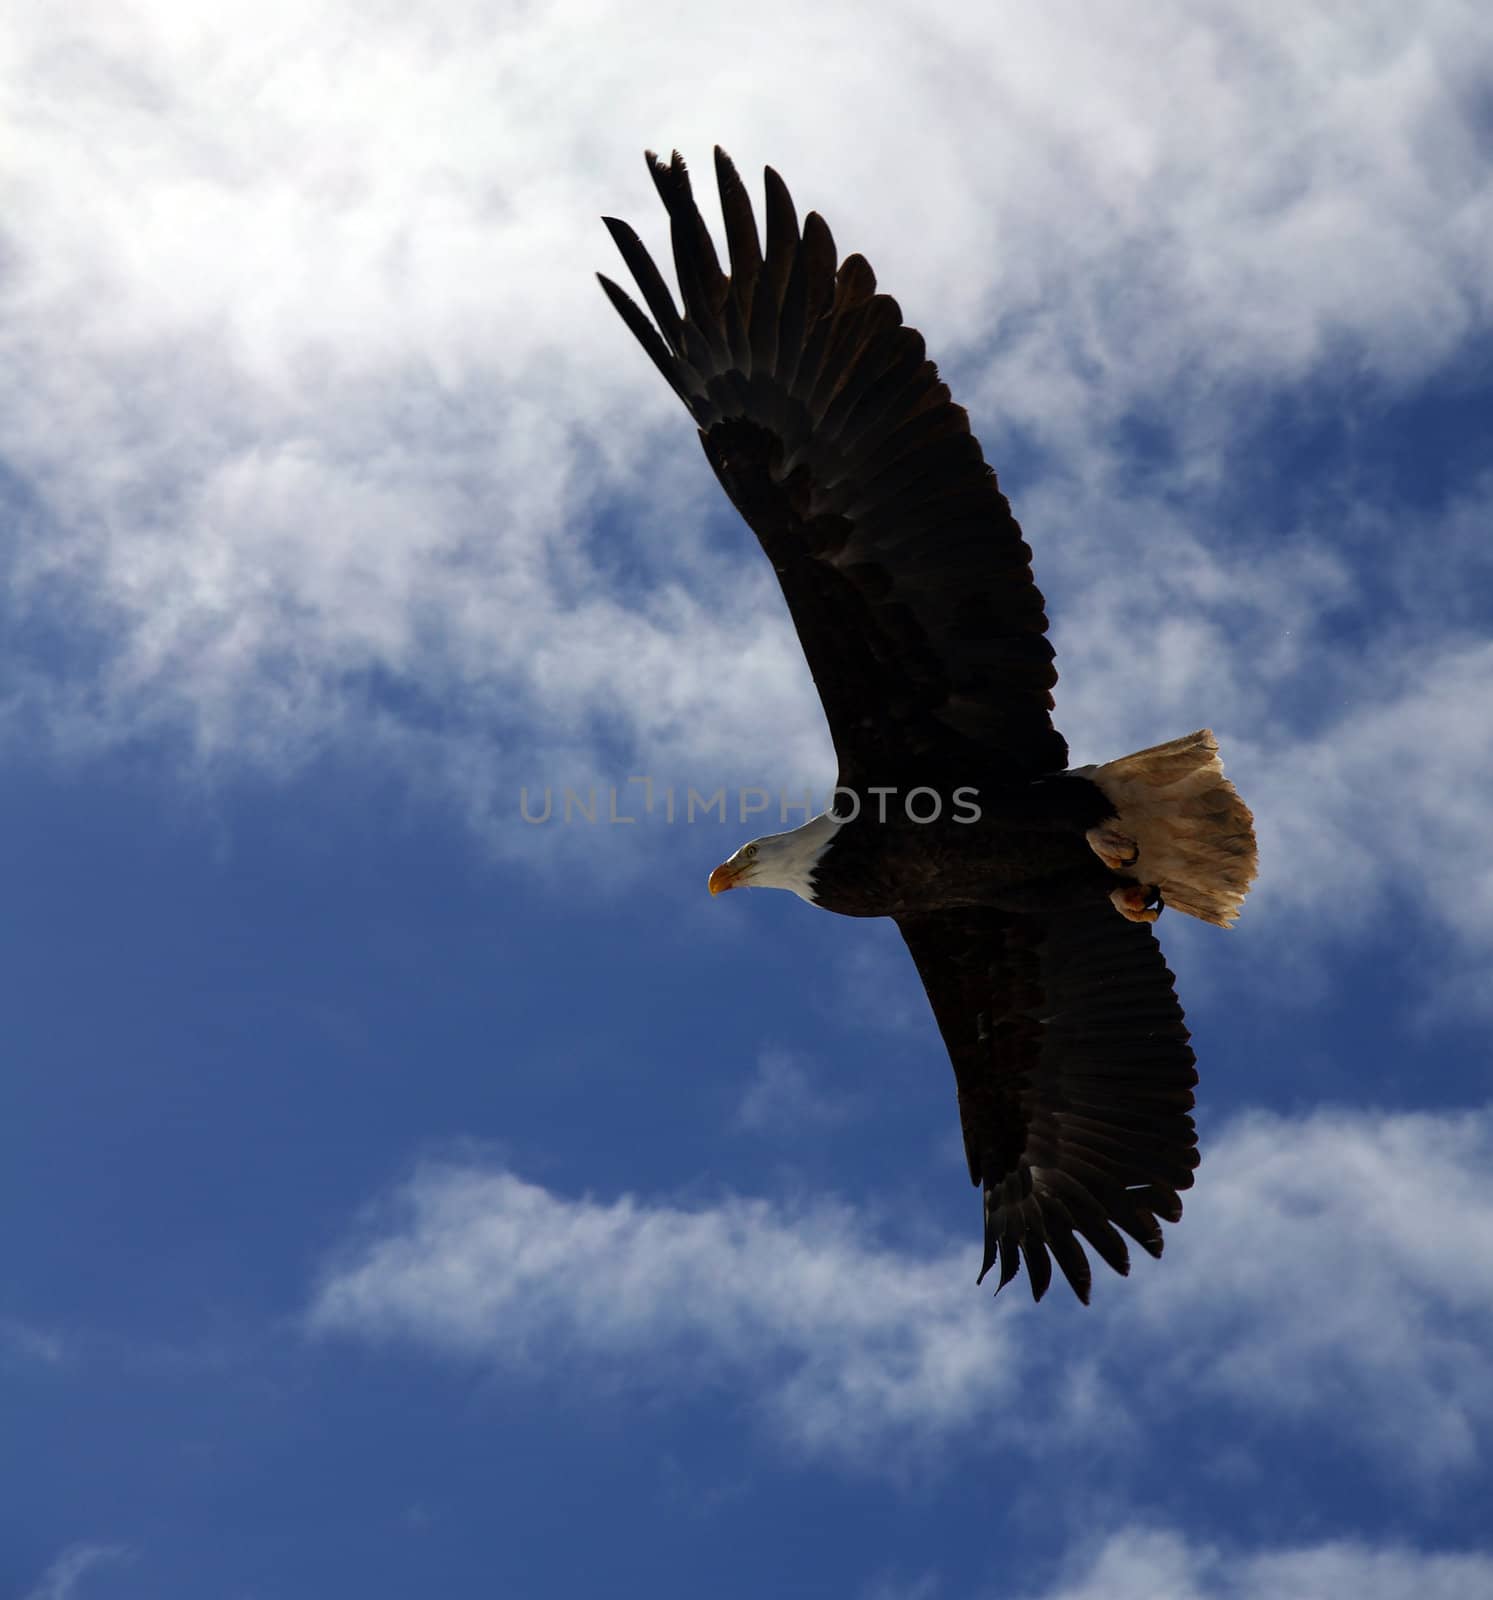 A Bald Eagle in flight by thomasw